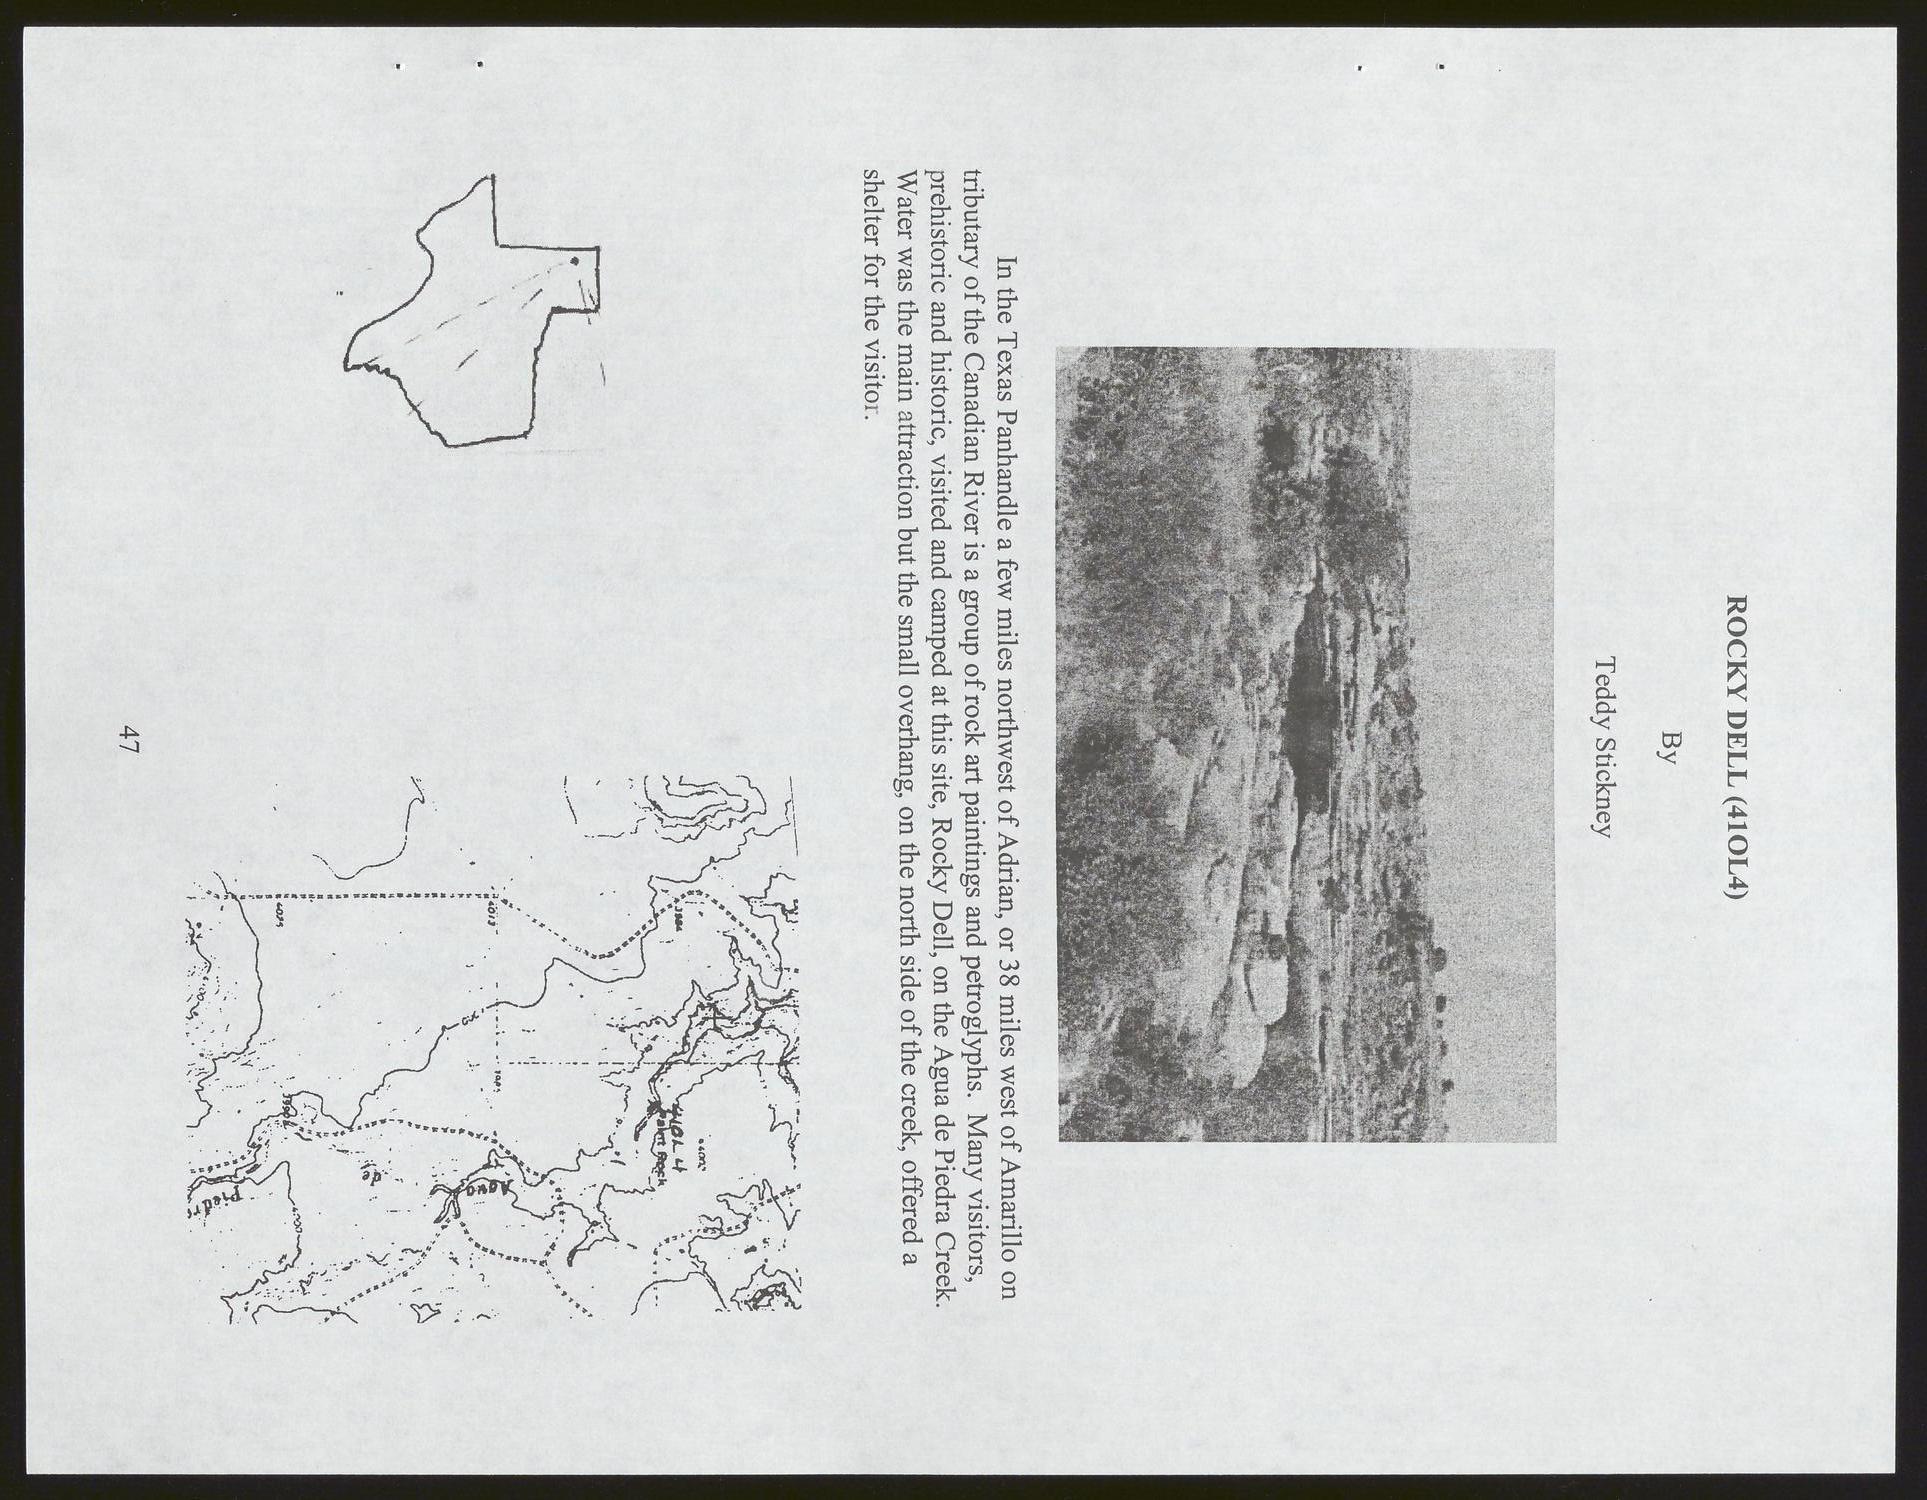 Transactions of the Regional Archeological Symposium for Southeastern New Mexico and Western Texas: 2002
                                                
                                                    47
                                                